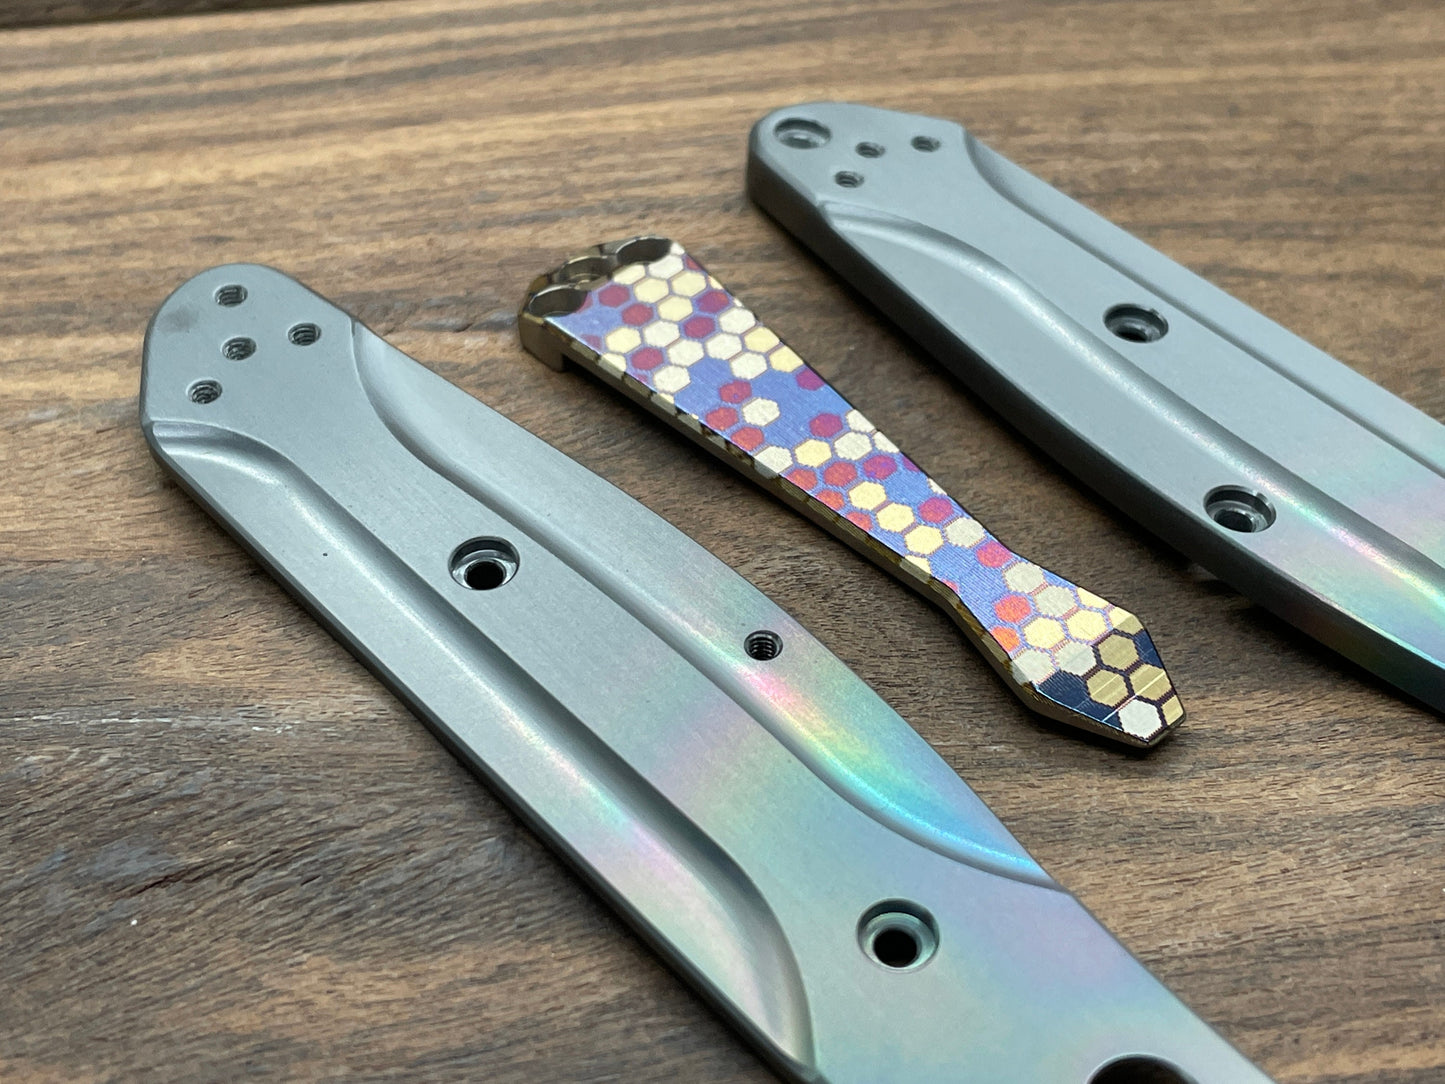 HONEYCOMB heat ano engraved Dmd Titanium CLIP for most Benchmade models